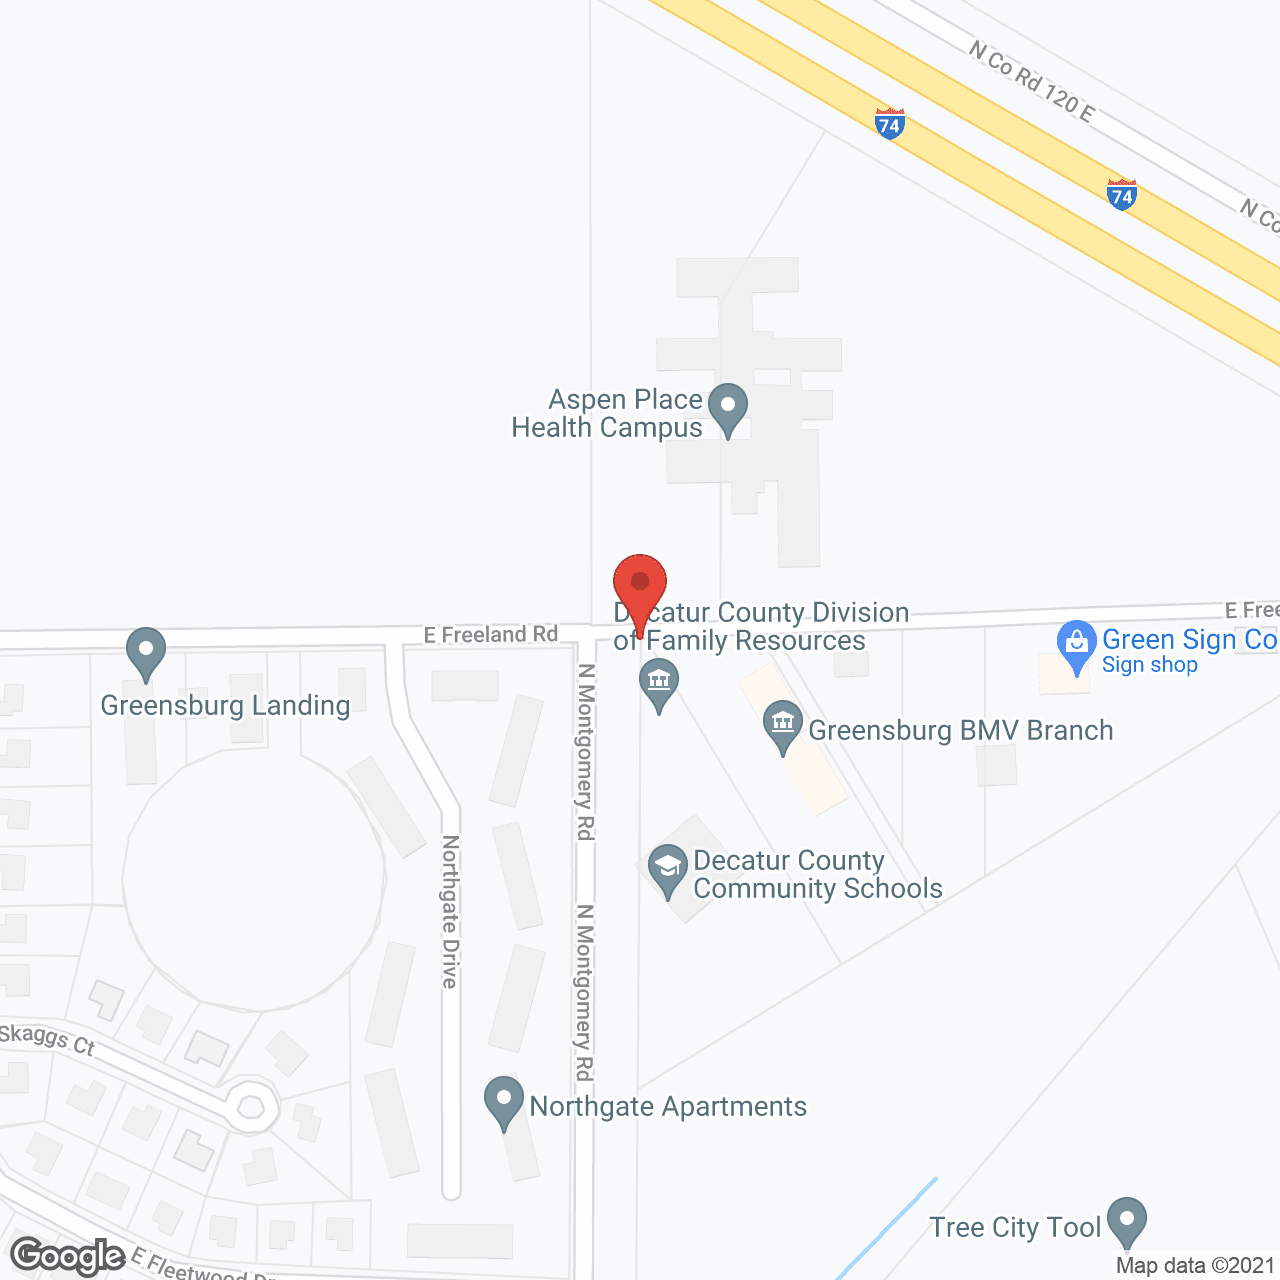 Aspen Place Health Campus in google map